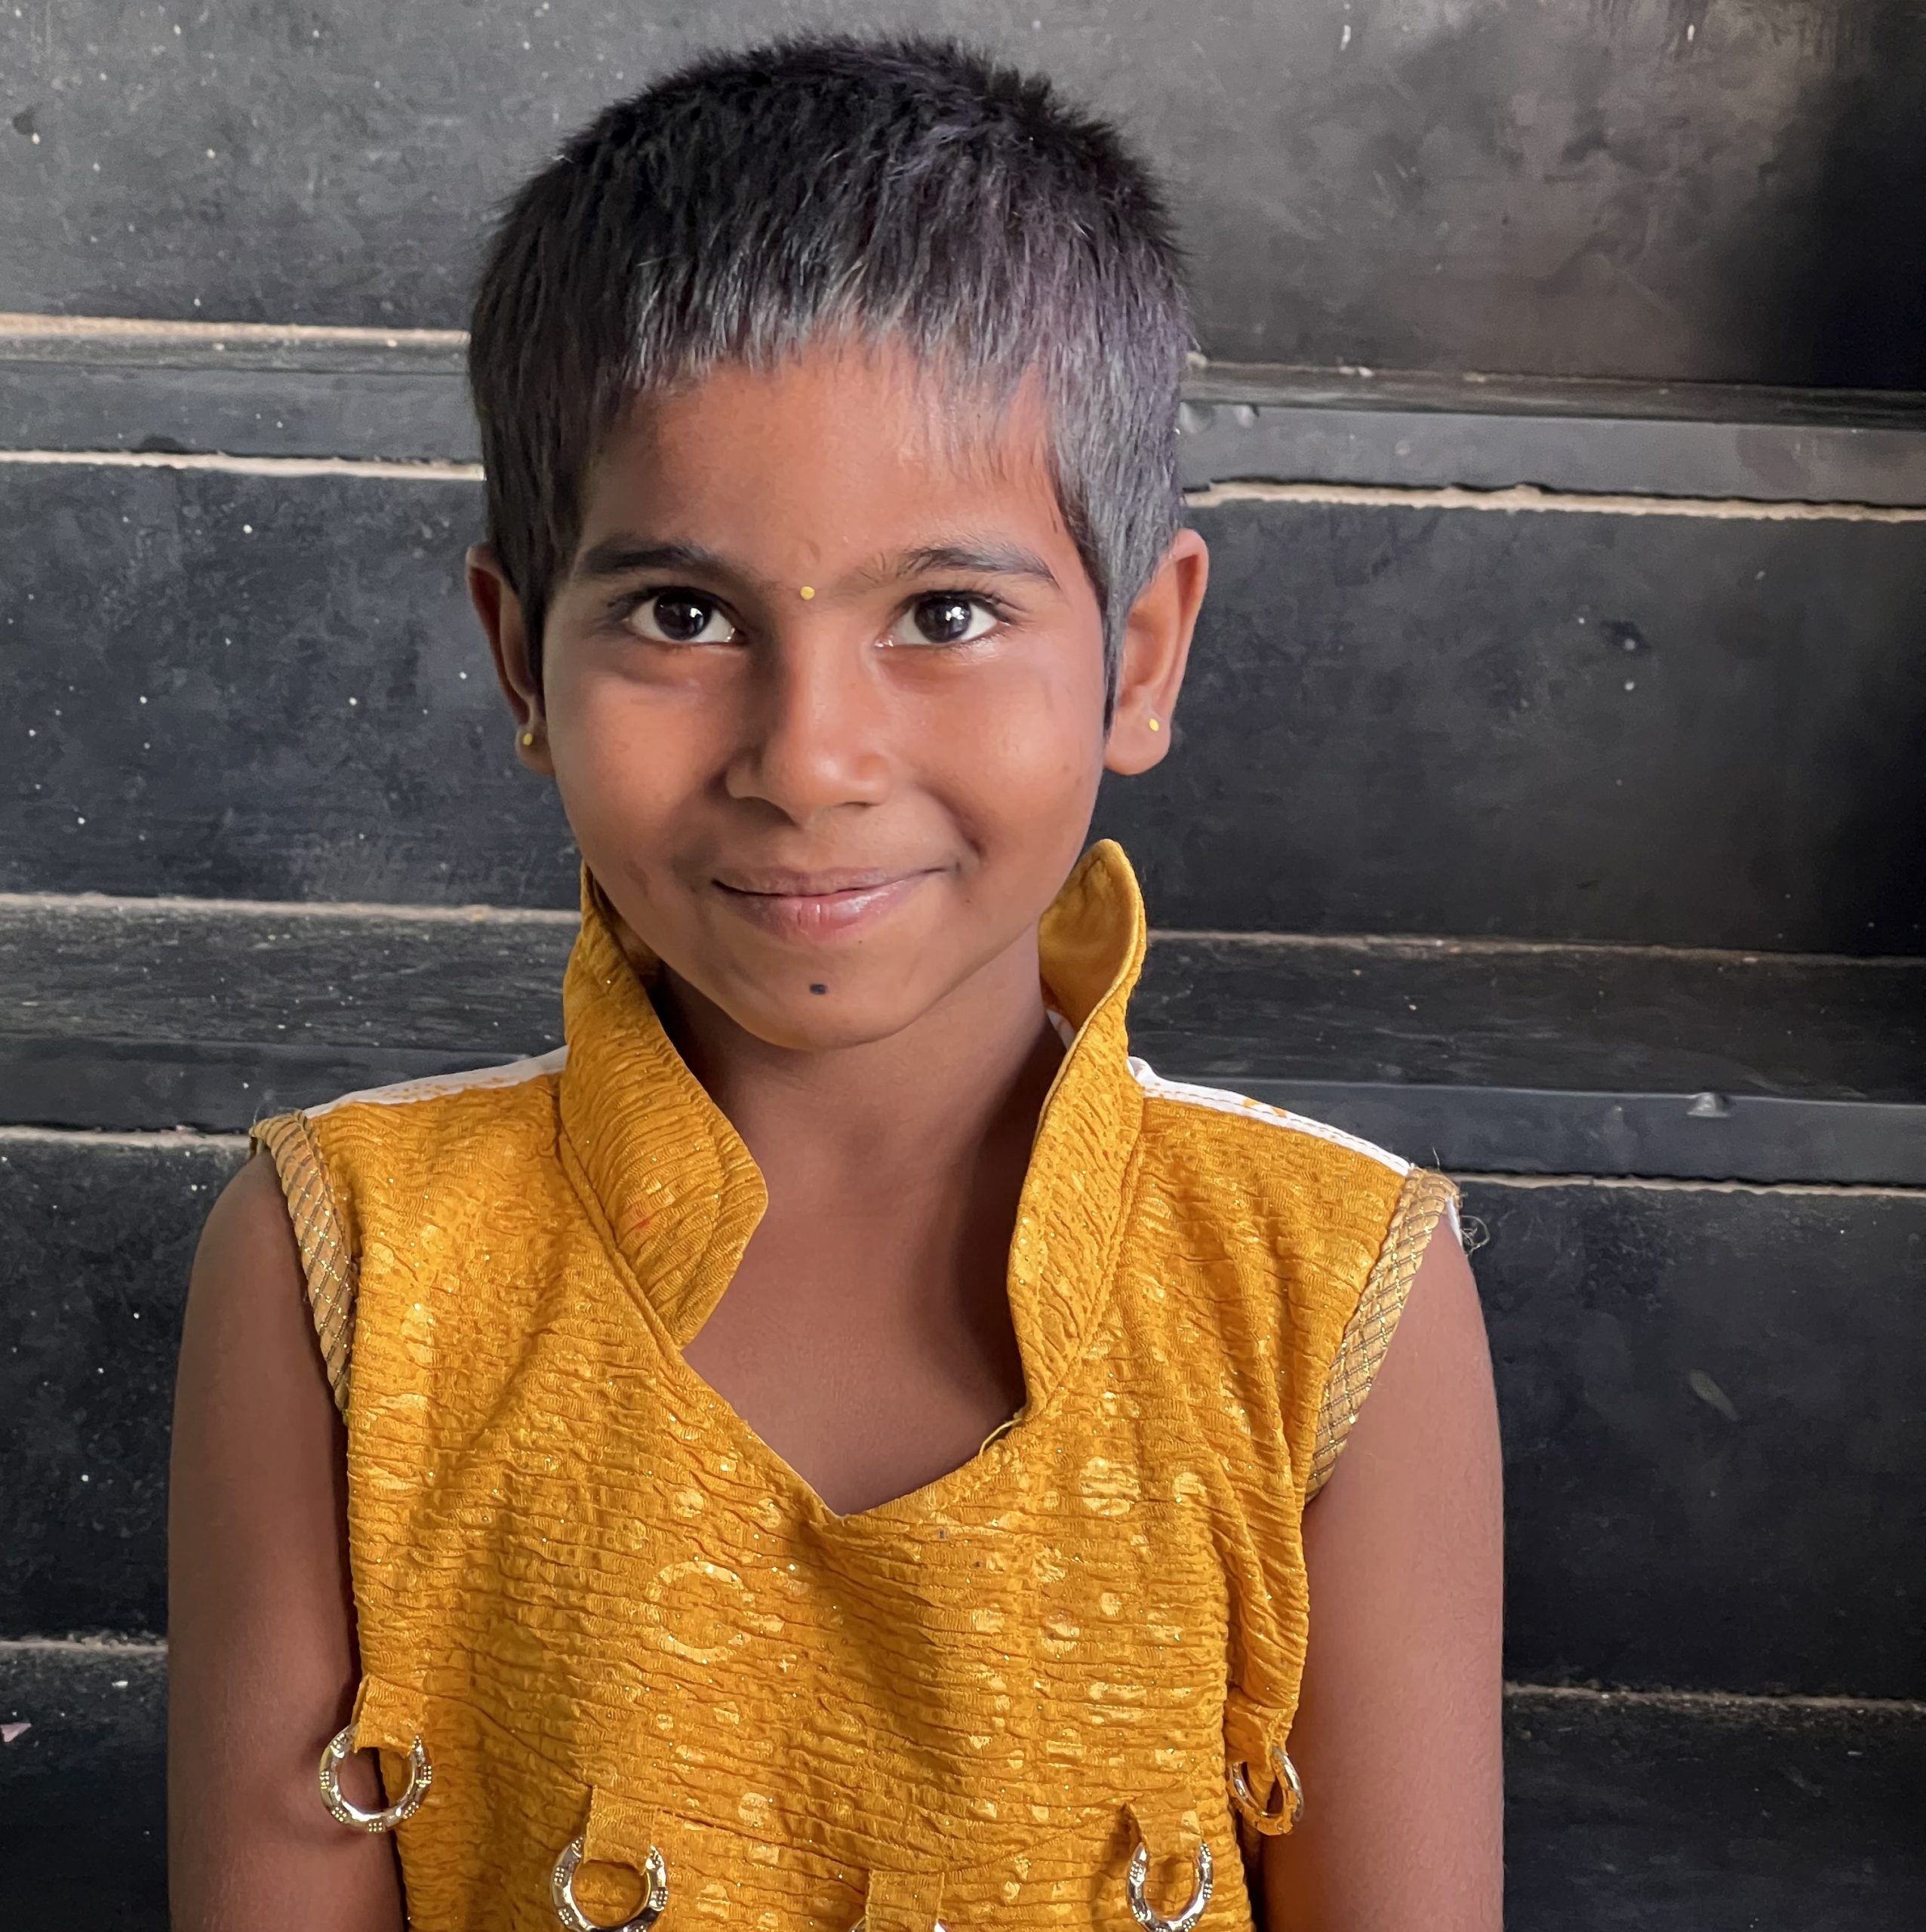 Sponsor Girl Child in India Telugu Manisha in SERUDS Orphanage. She's 8 years old, studying in 3rd class. Father is an alcoholic and abandoned the family; mother who is working was unable to send children to school. Donate for education and save income tax u/s 80g